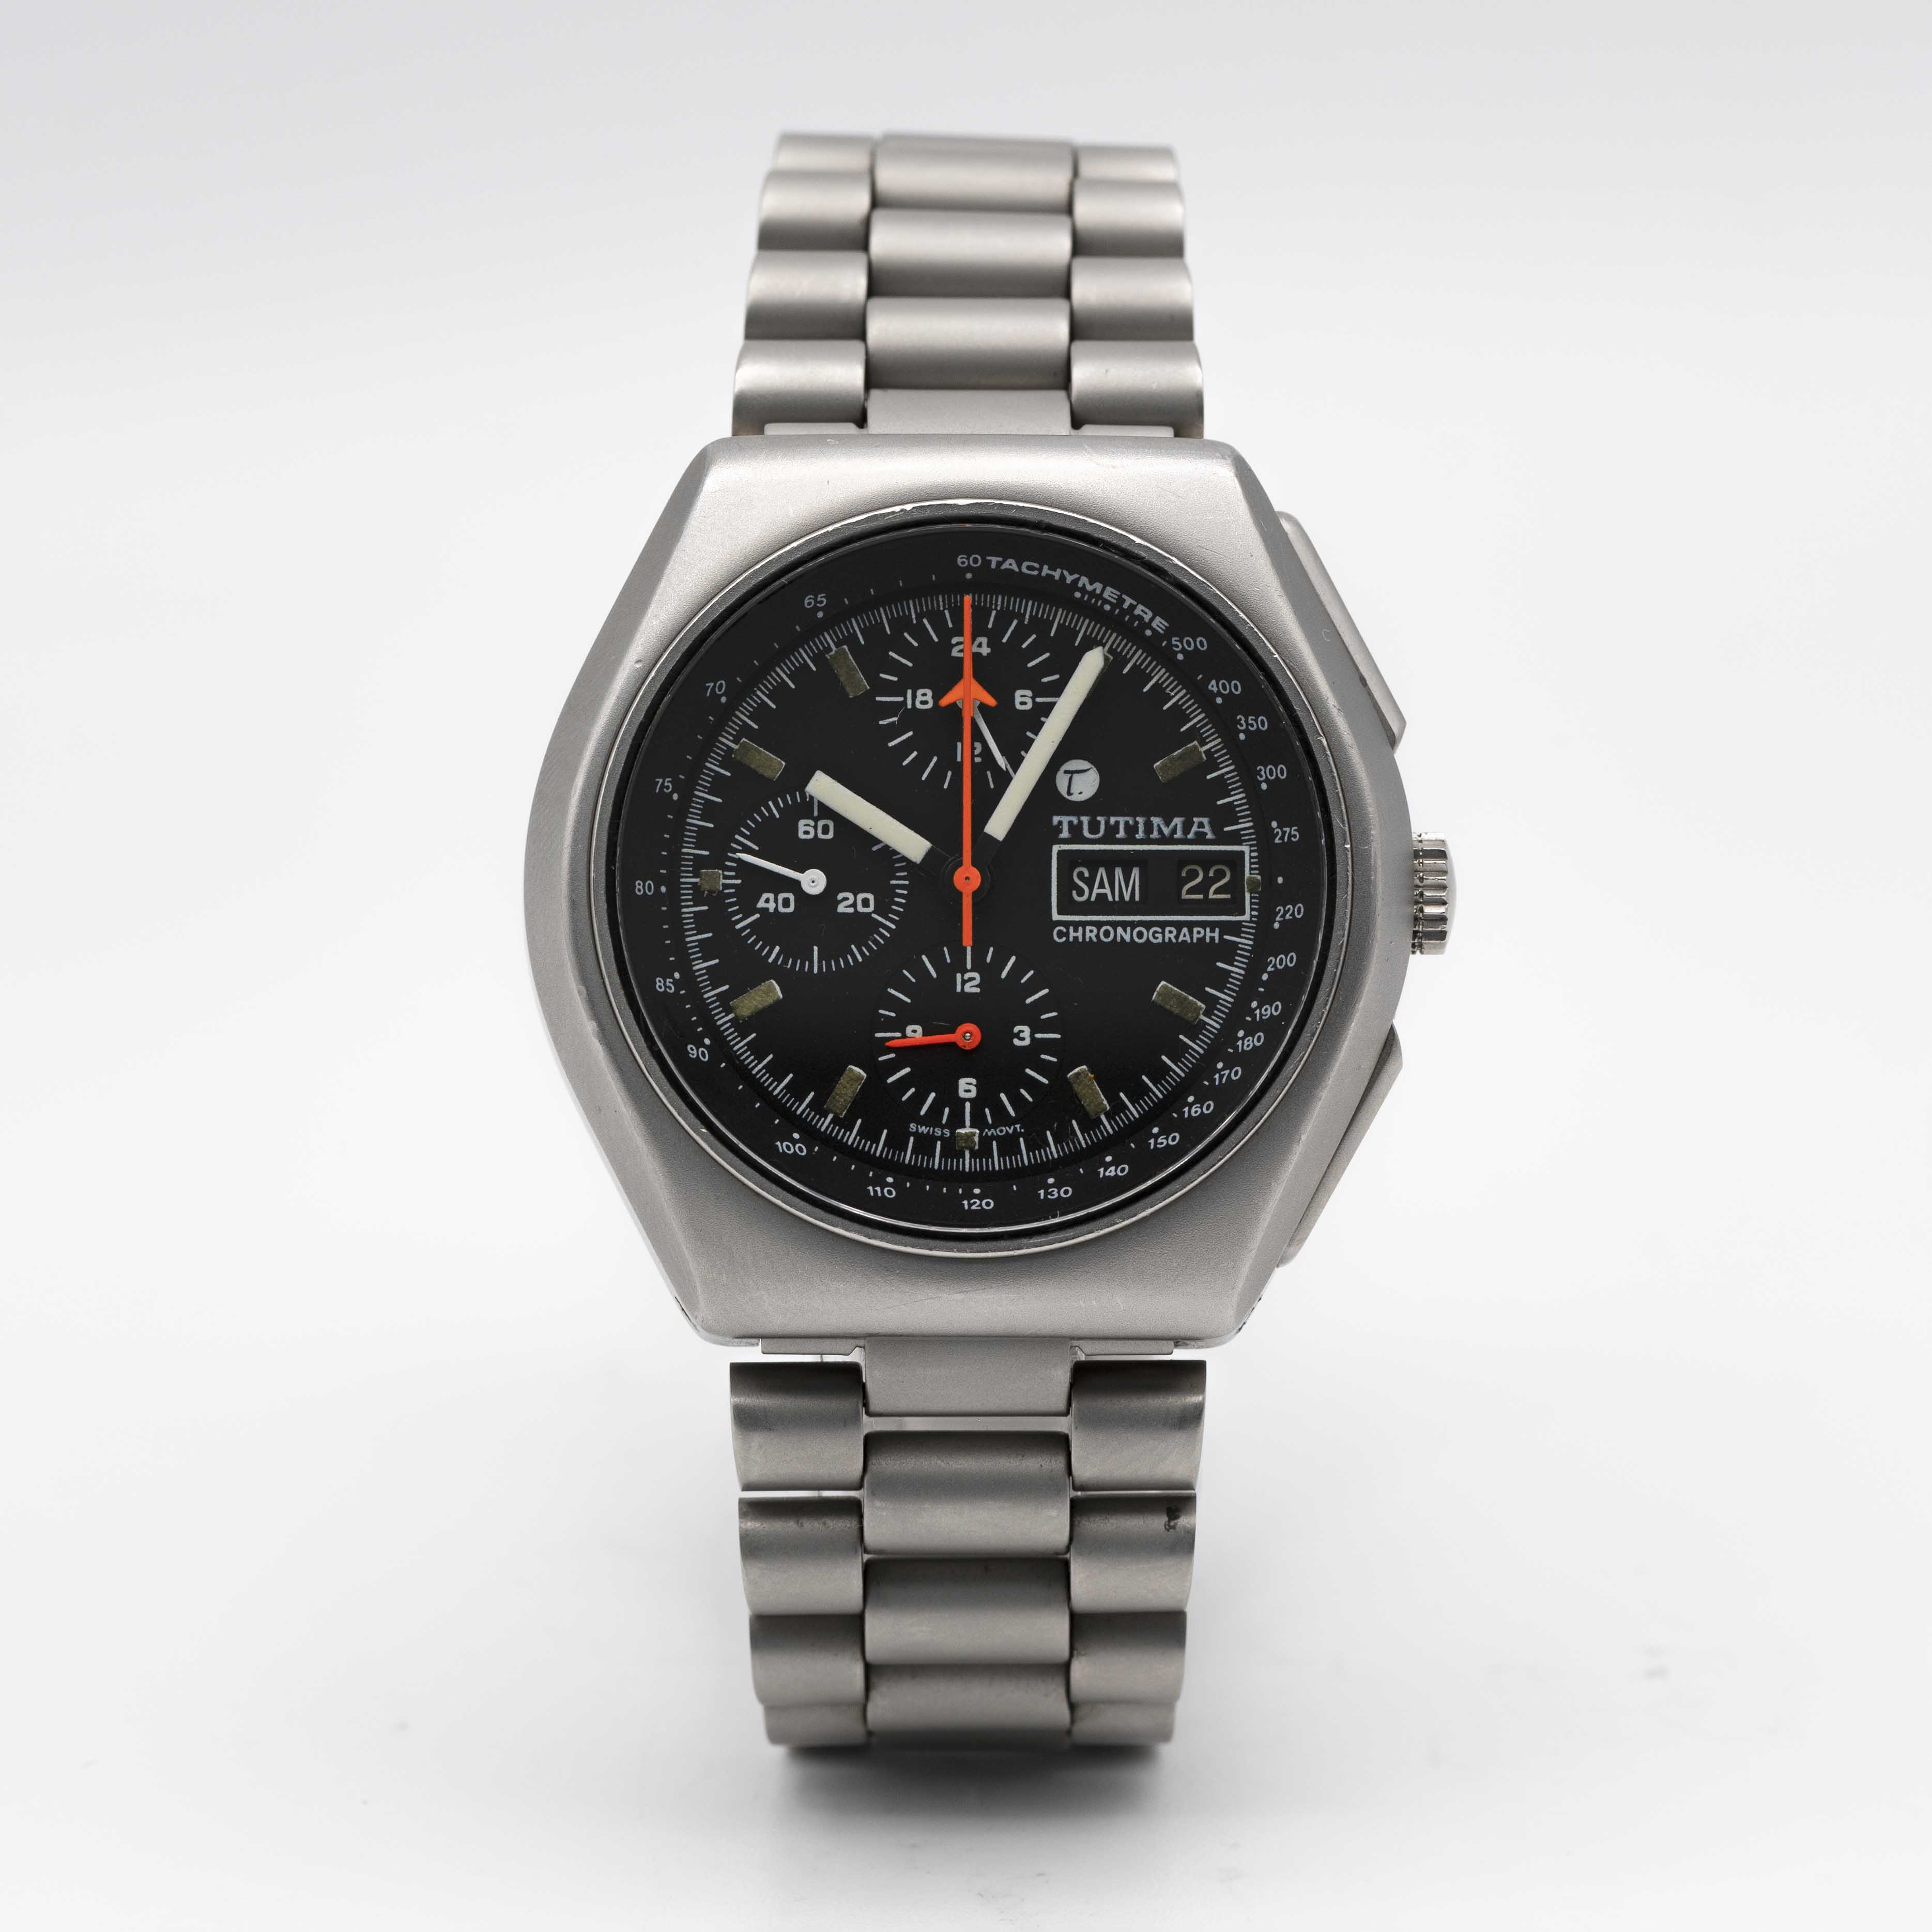 A GENTLEMAN'S STAINLESS STEEL MILITARY TUTIMA AUTOMATIC CHRONOGRAPH BRACELET WATCH CIRCA 1980s - Image 2 of 9